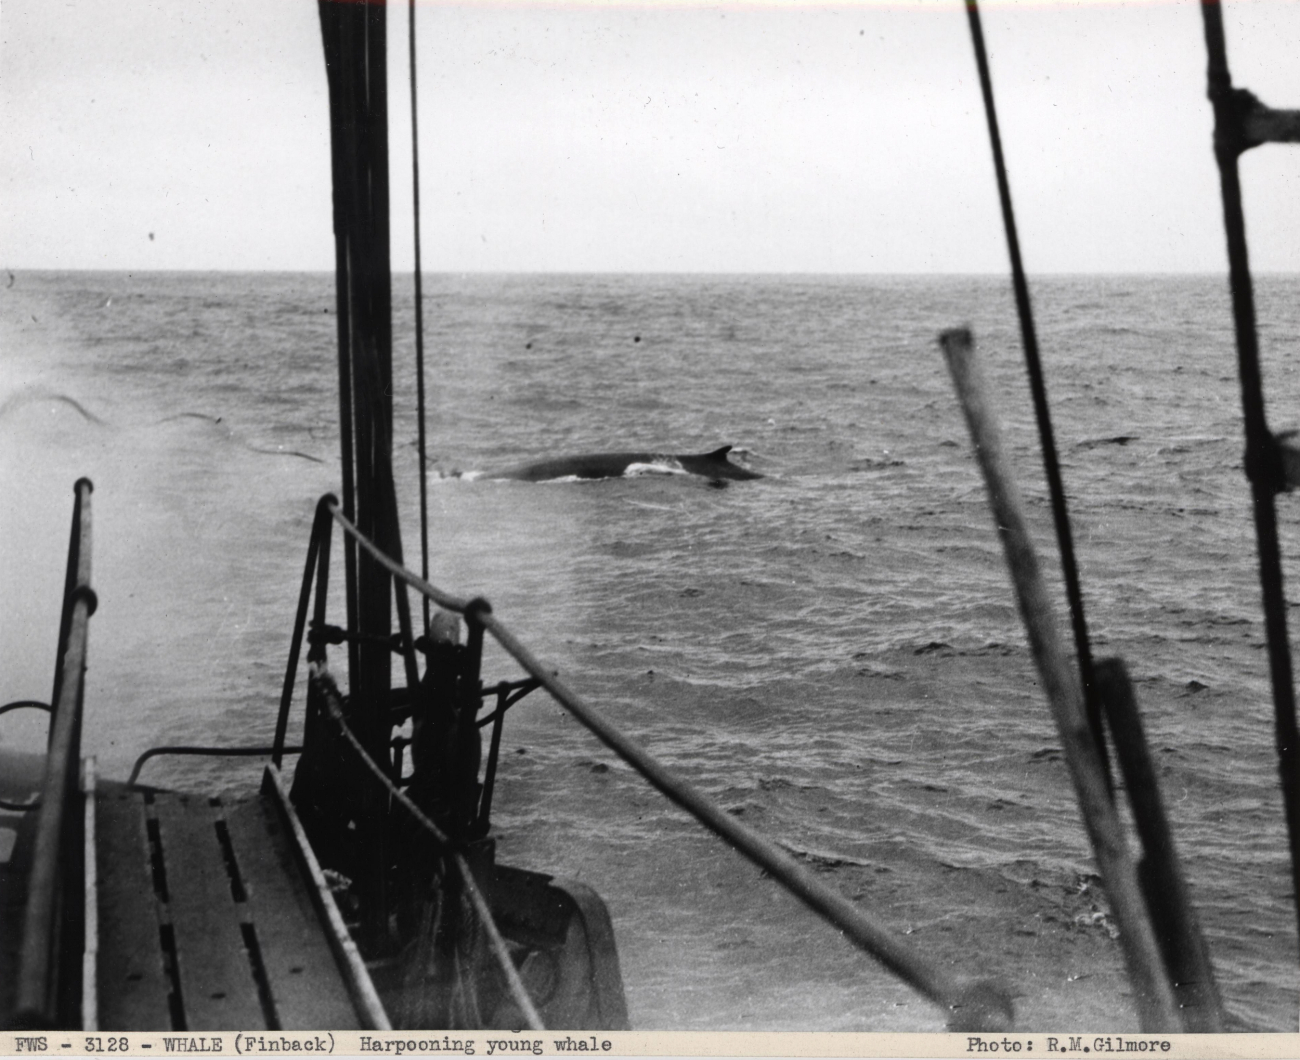 Harpooning a young finback whale